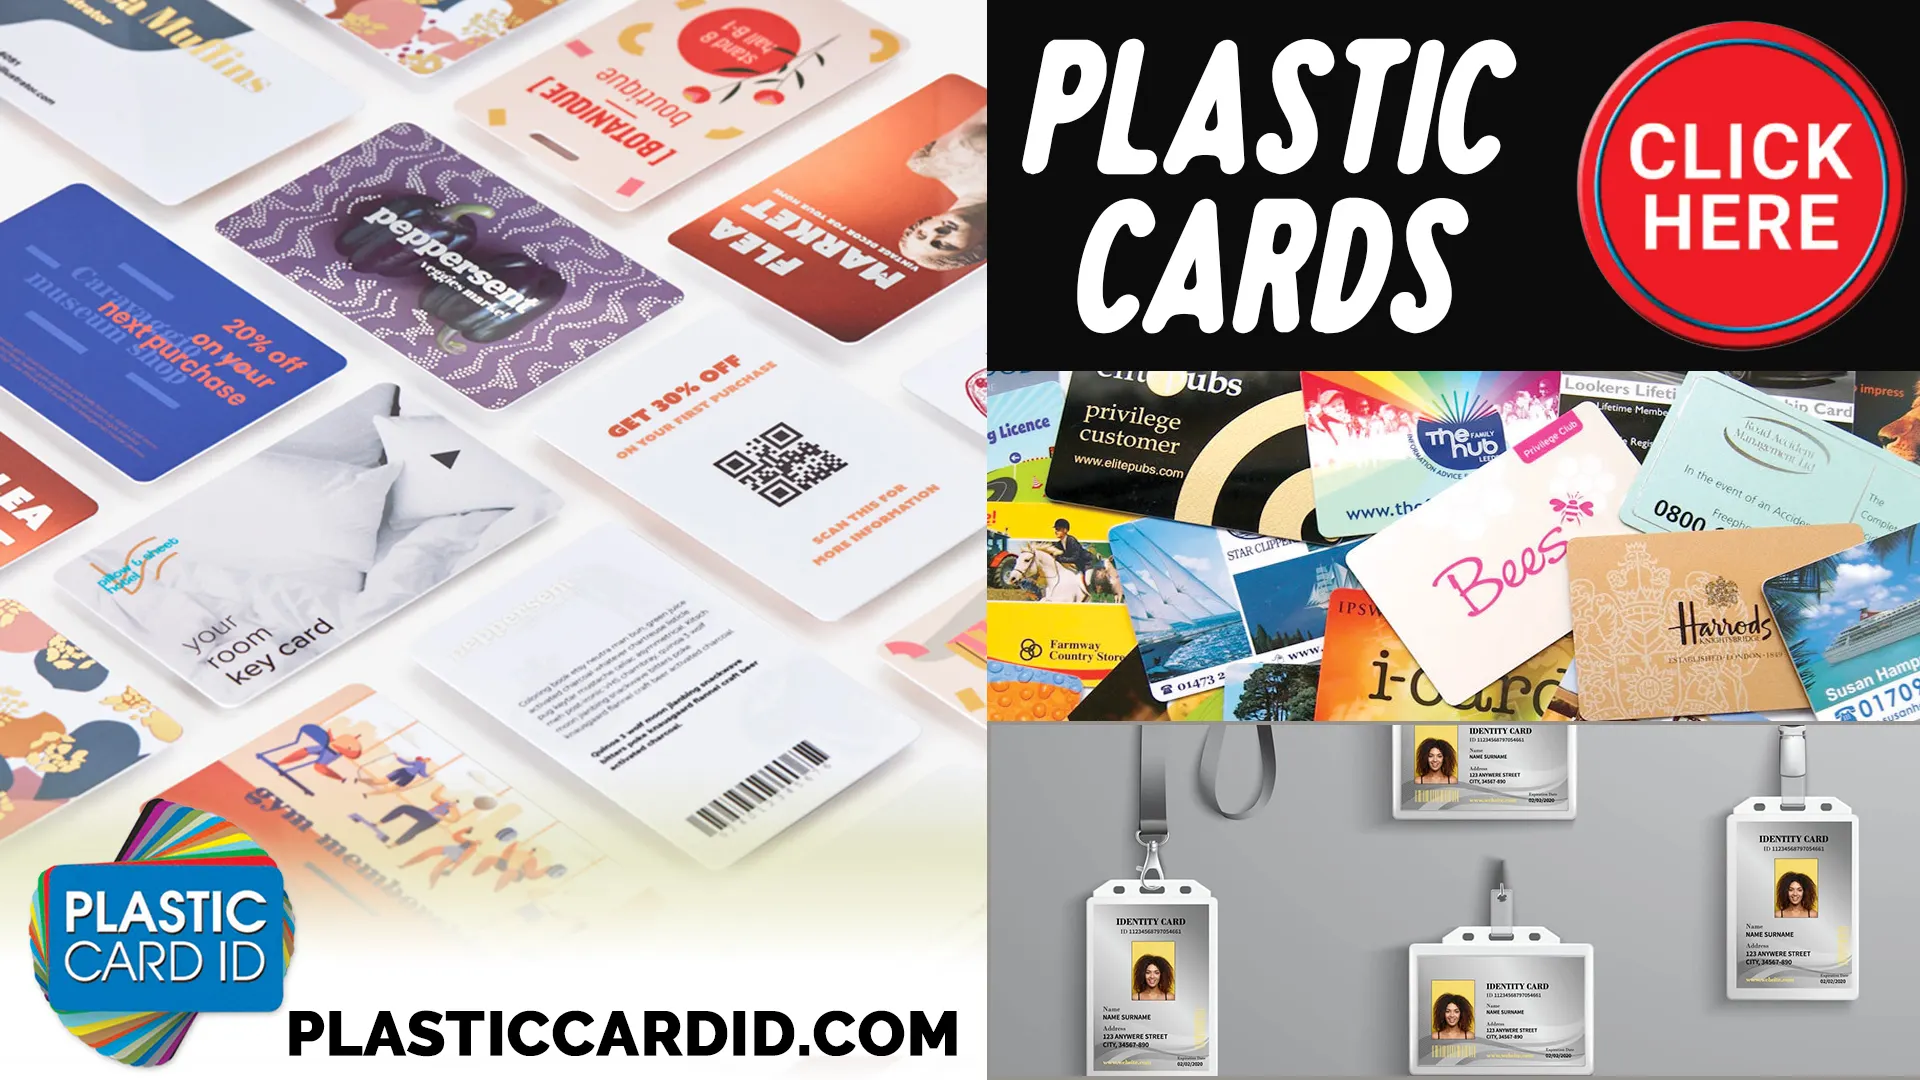 Welcome to the Future of Plastic Card Solutions with Plastic Card ID




